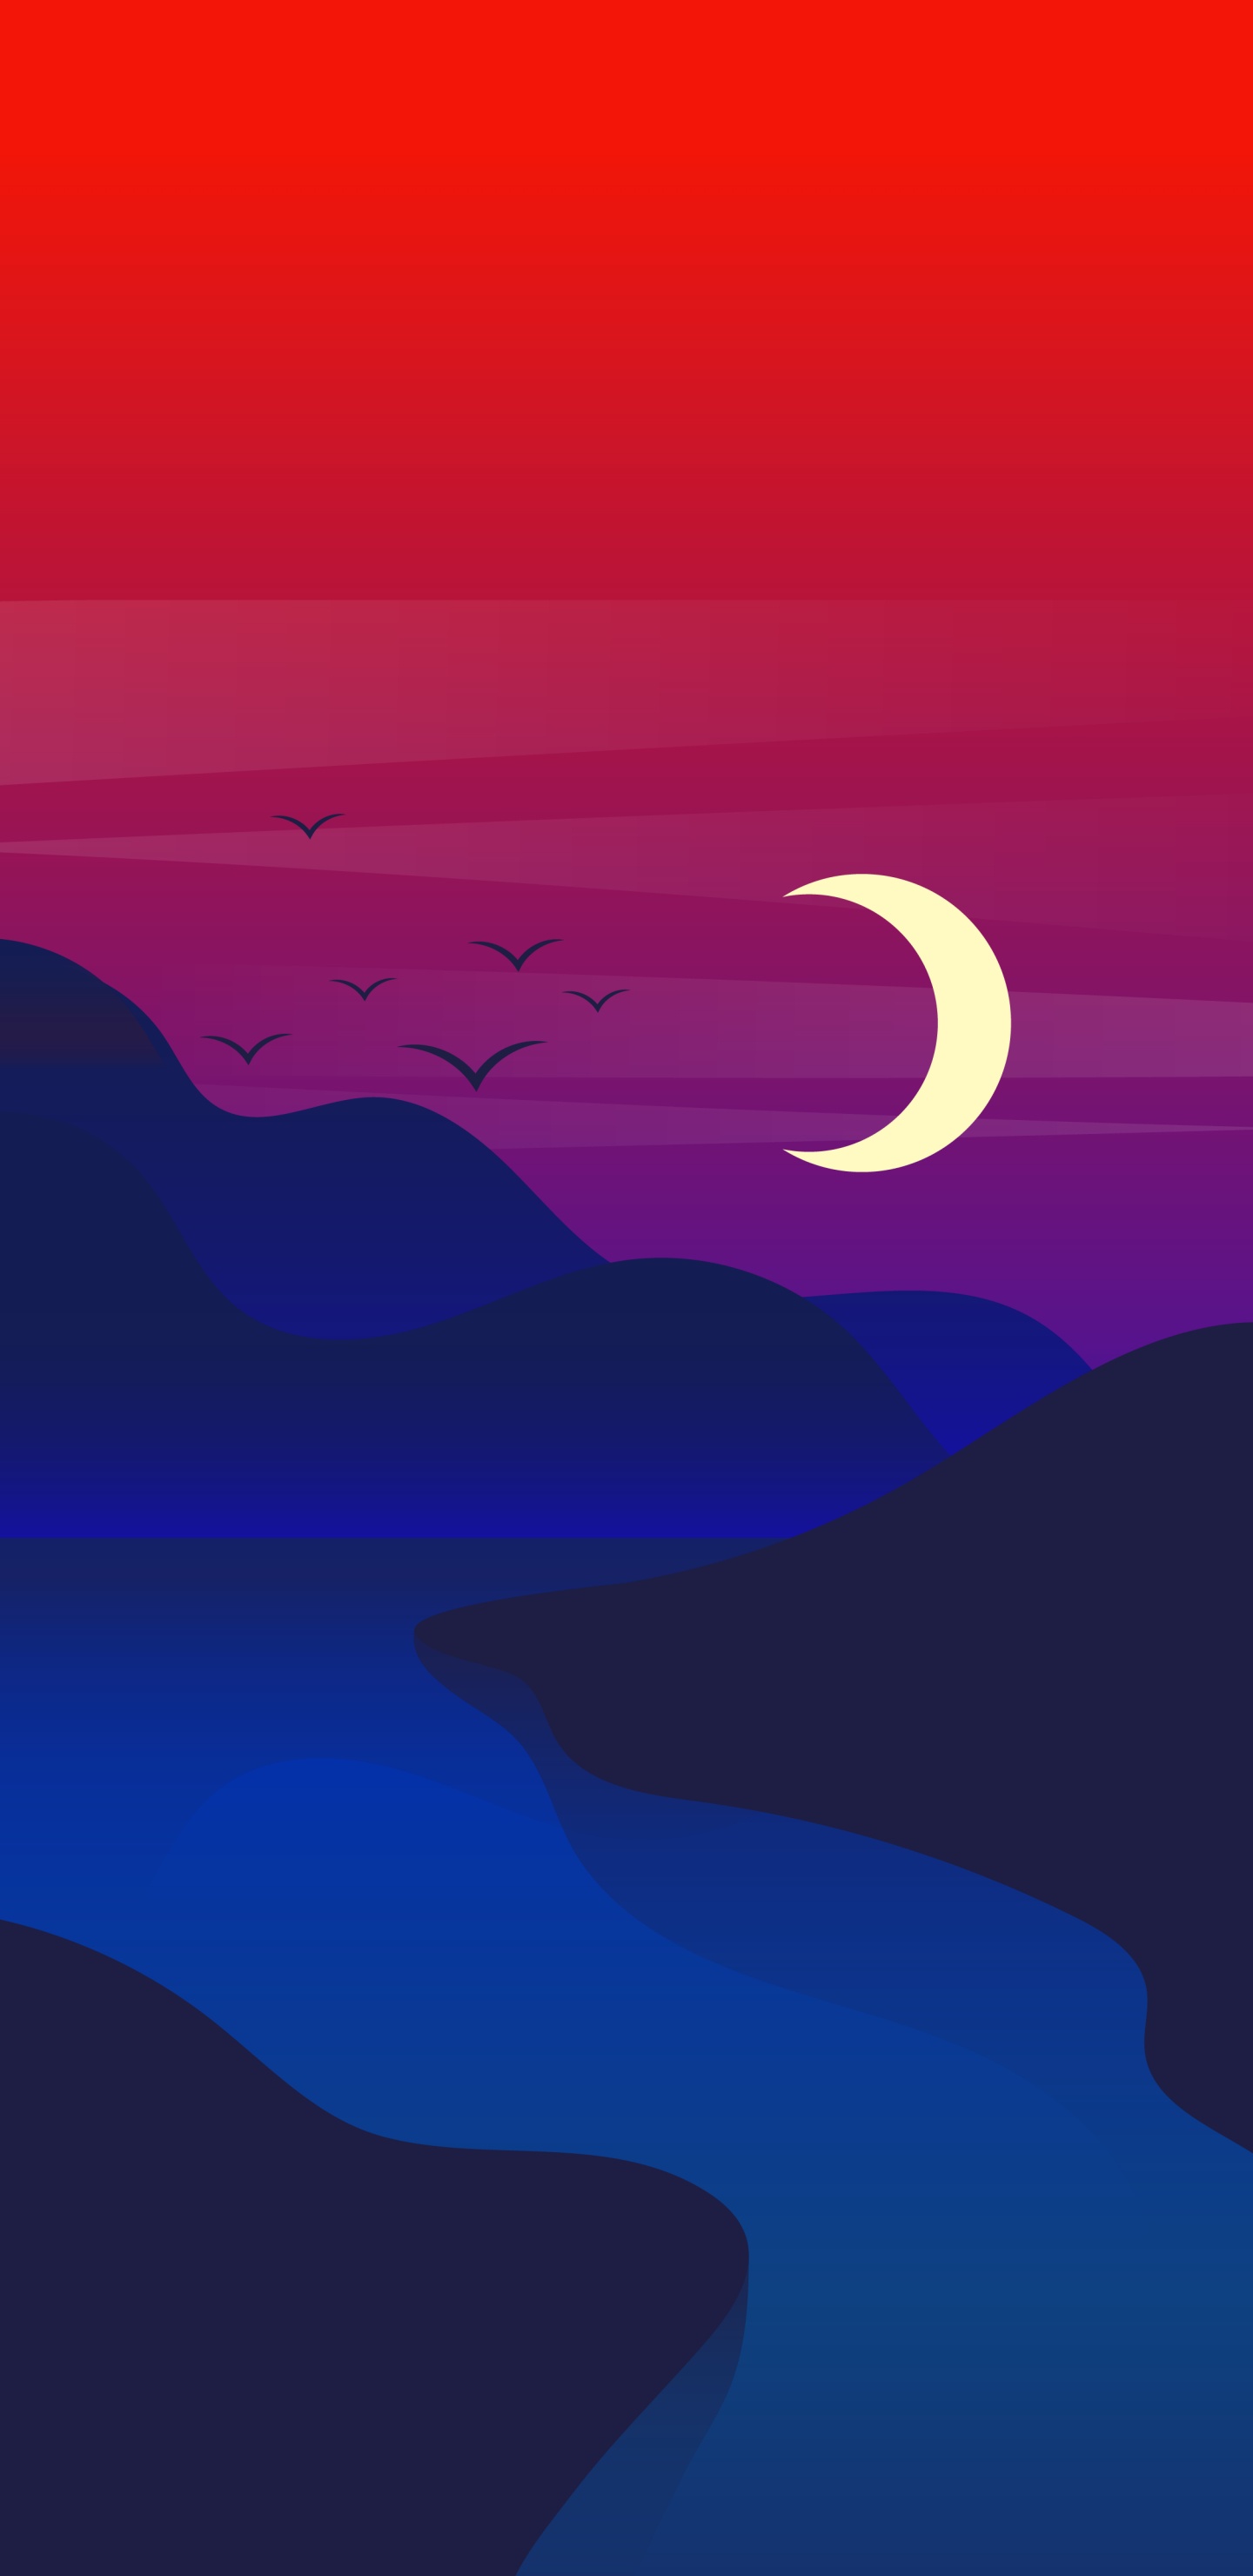 Tablet, Ambiente, Luna, Afterglow, Atardecer. Wallpaper in 1440x2960 Resolution